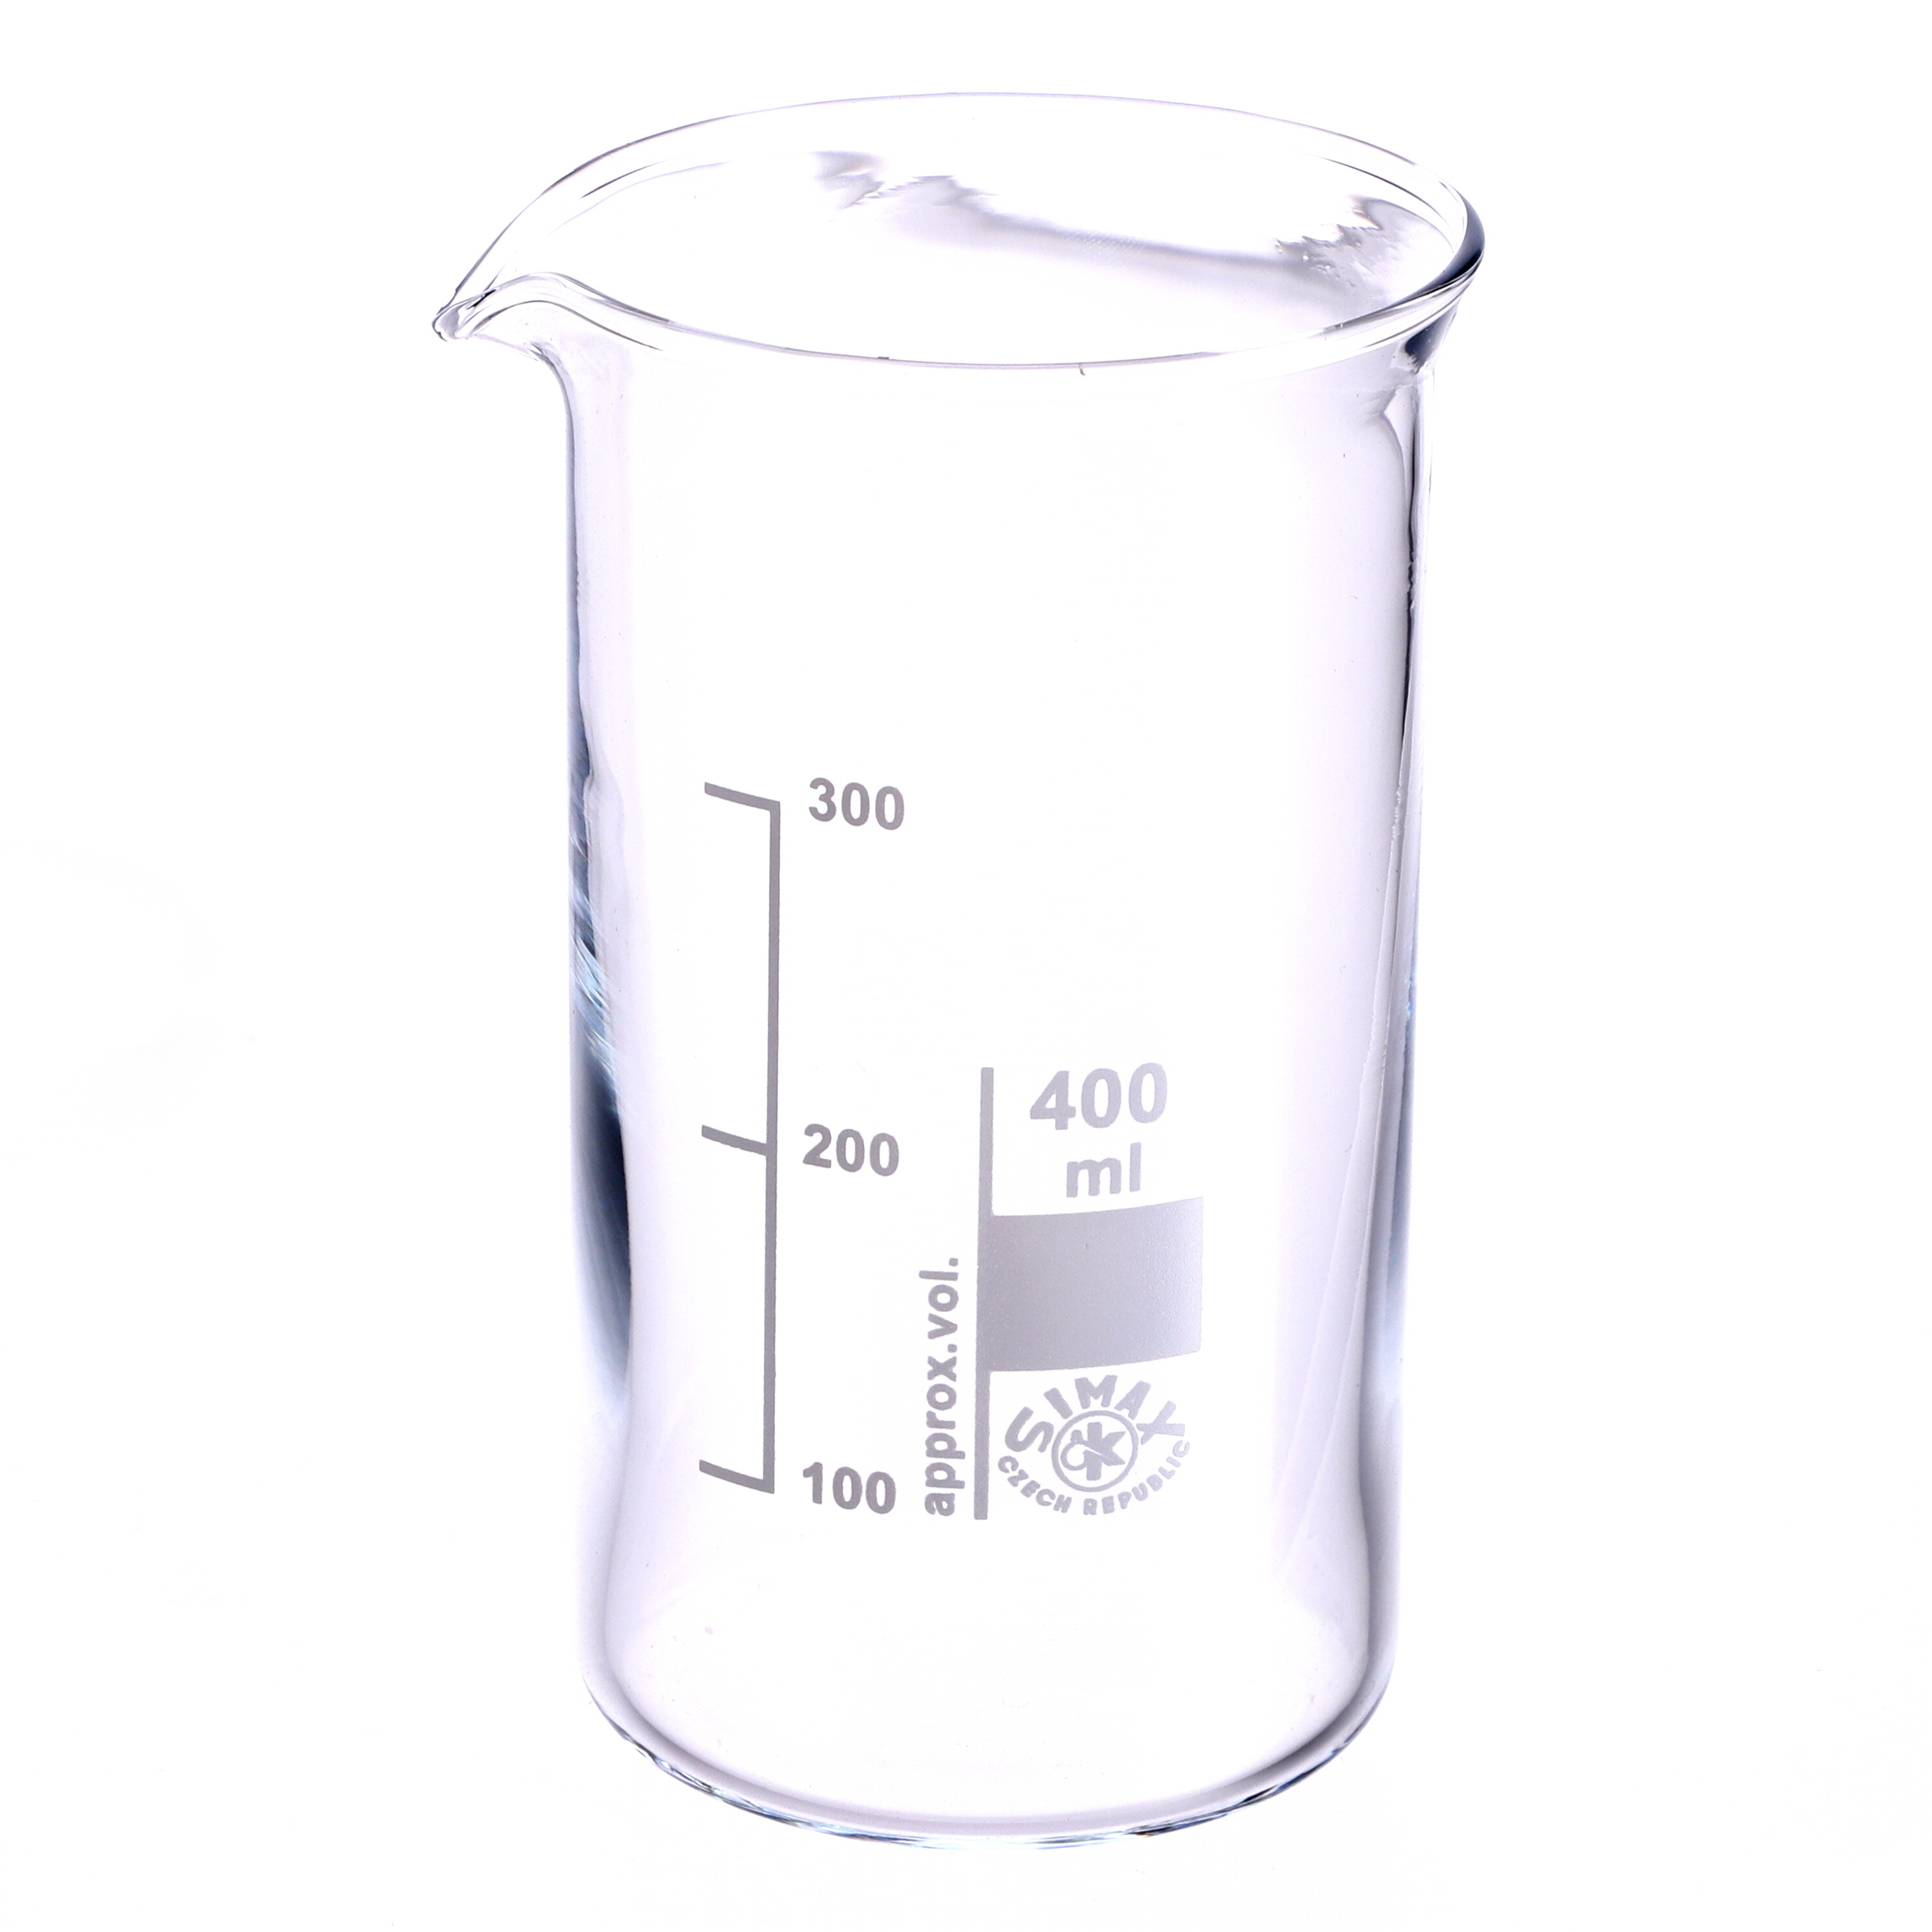 Simax Tall Form Beaker With Spout 400ml